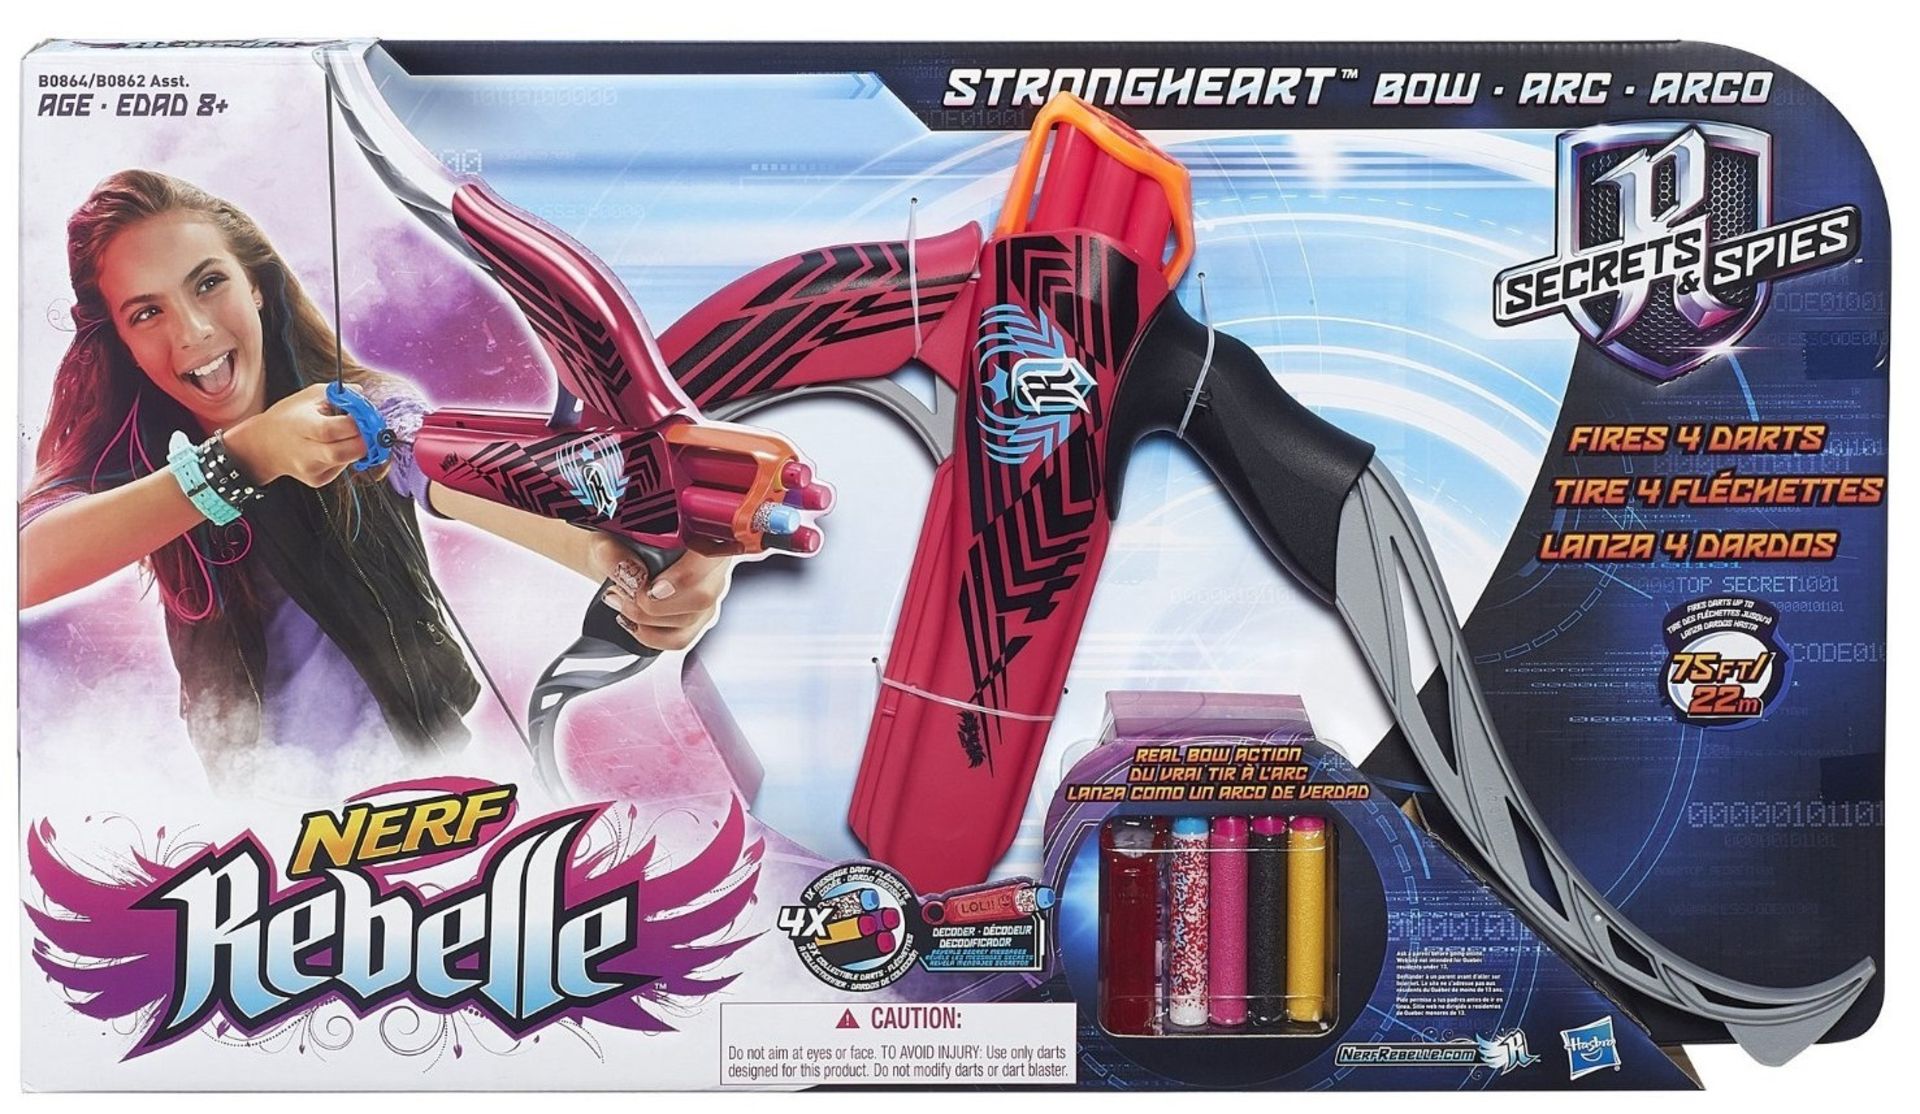 V *TRADE QTY* Brand New Hasbro Nerf Rebelle Secrets And Spies Strongheart Bow With 4 Darts And